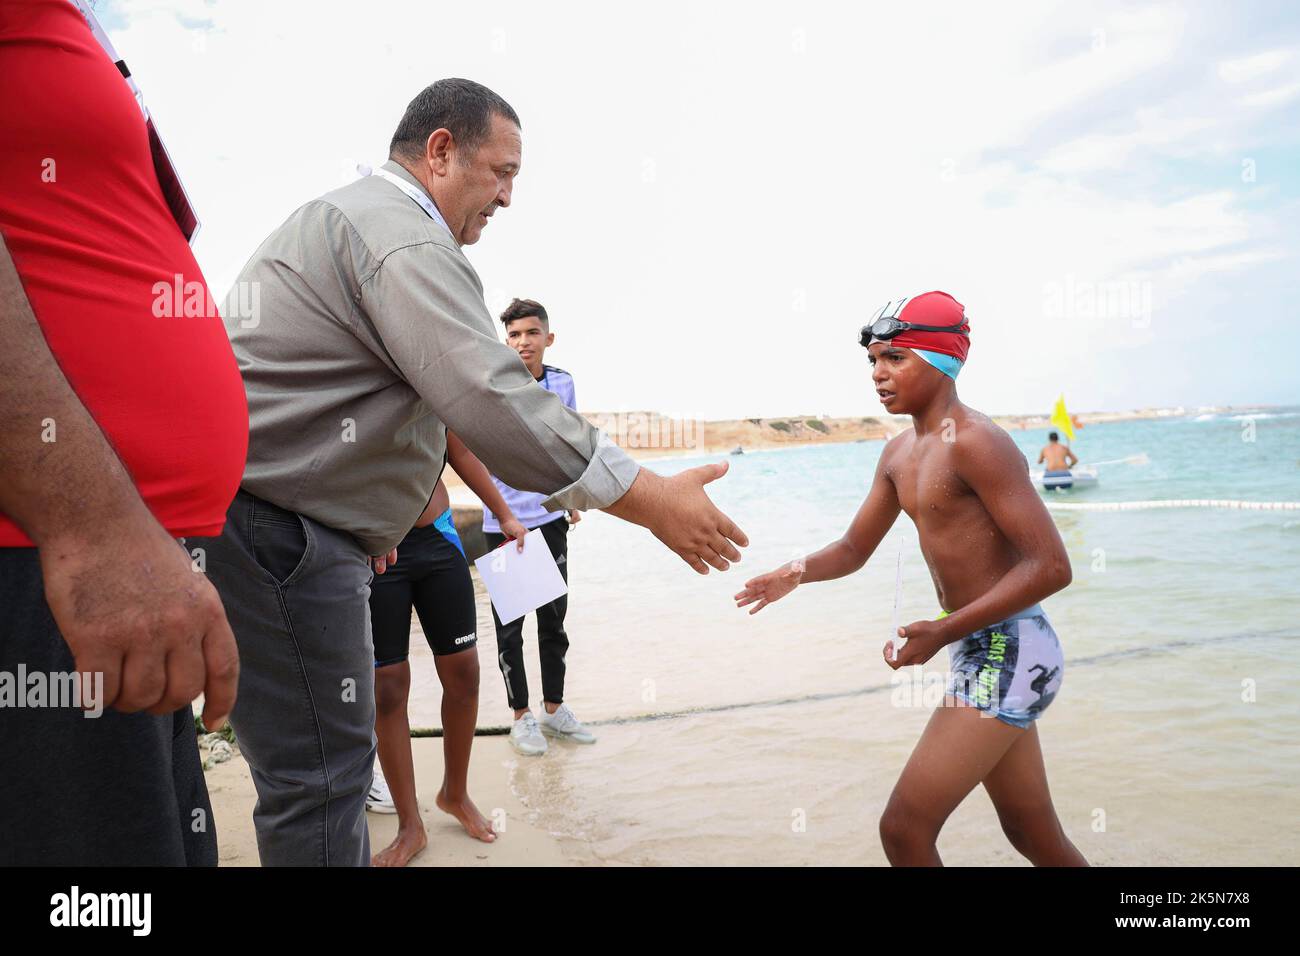 Morad Madi, one of the coaches congratulates a contestant during the Libya Swimming Competition in Misrata. The event had 75 swimmers and the competition included female participation for the first time in the history of Libya. Stock Photo